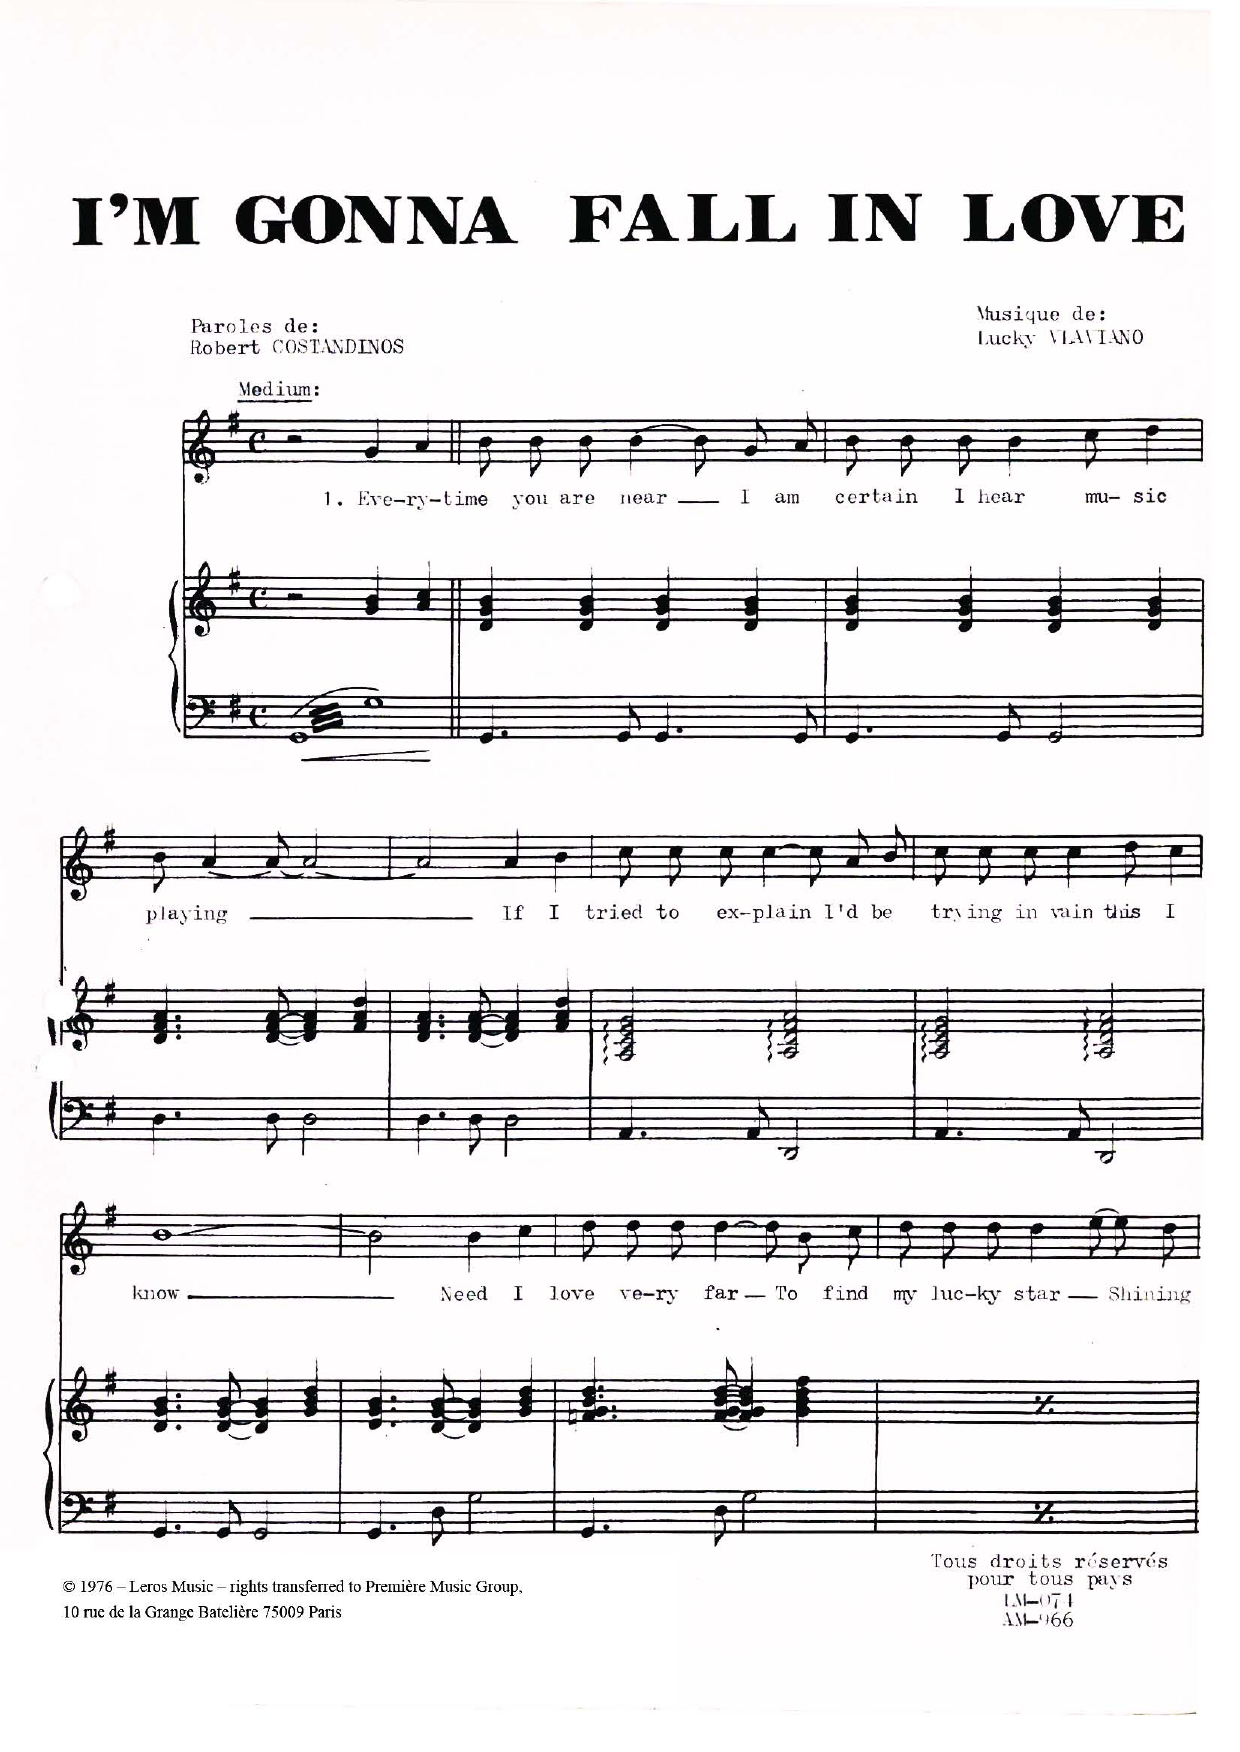 Download Lucky Vlaviano I'm Gonna Fall In Love Sheet Music